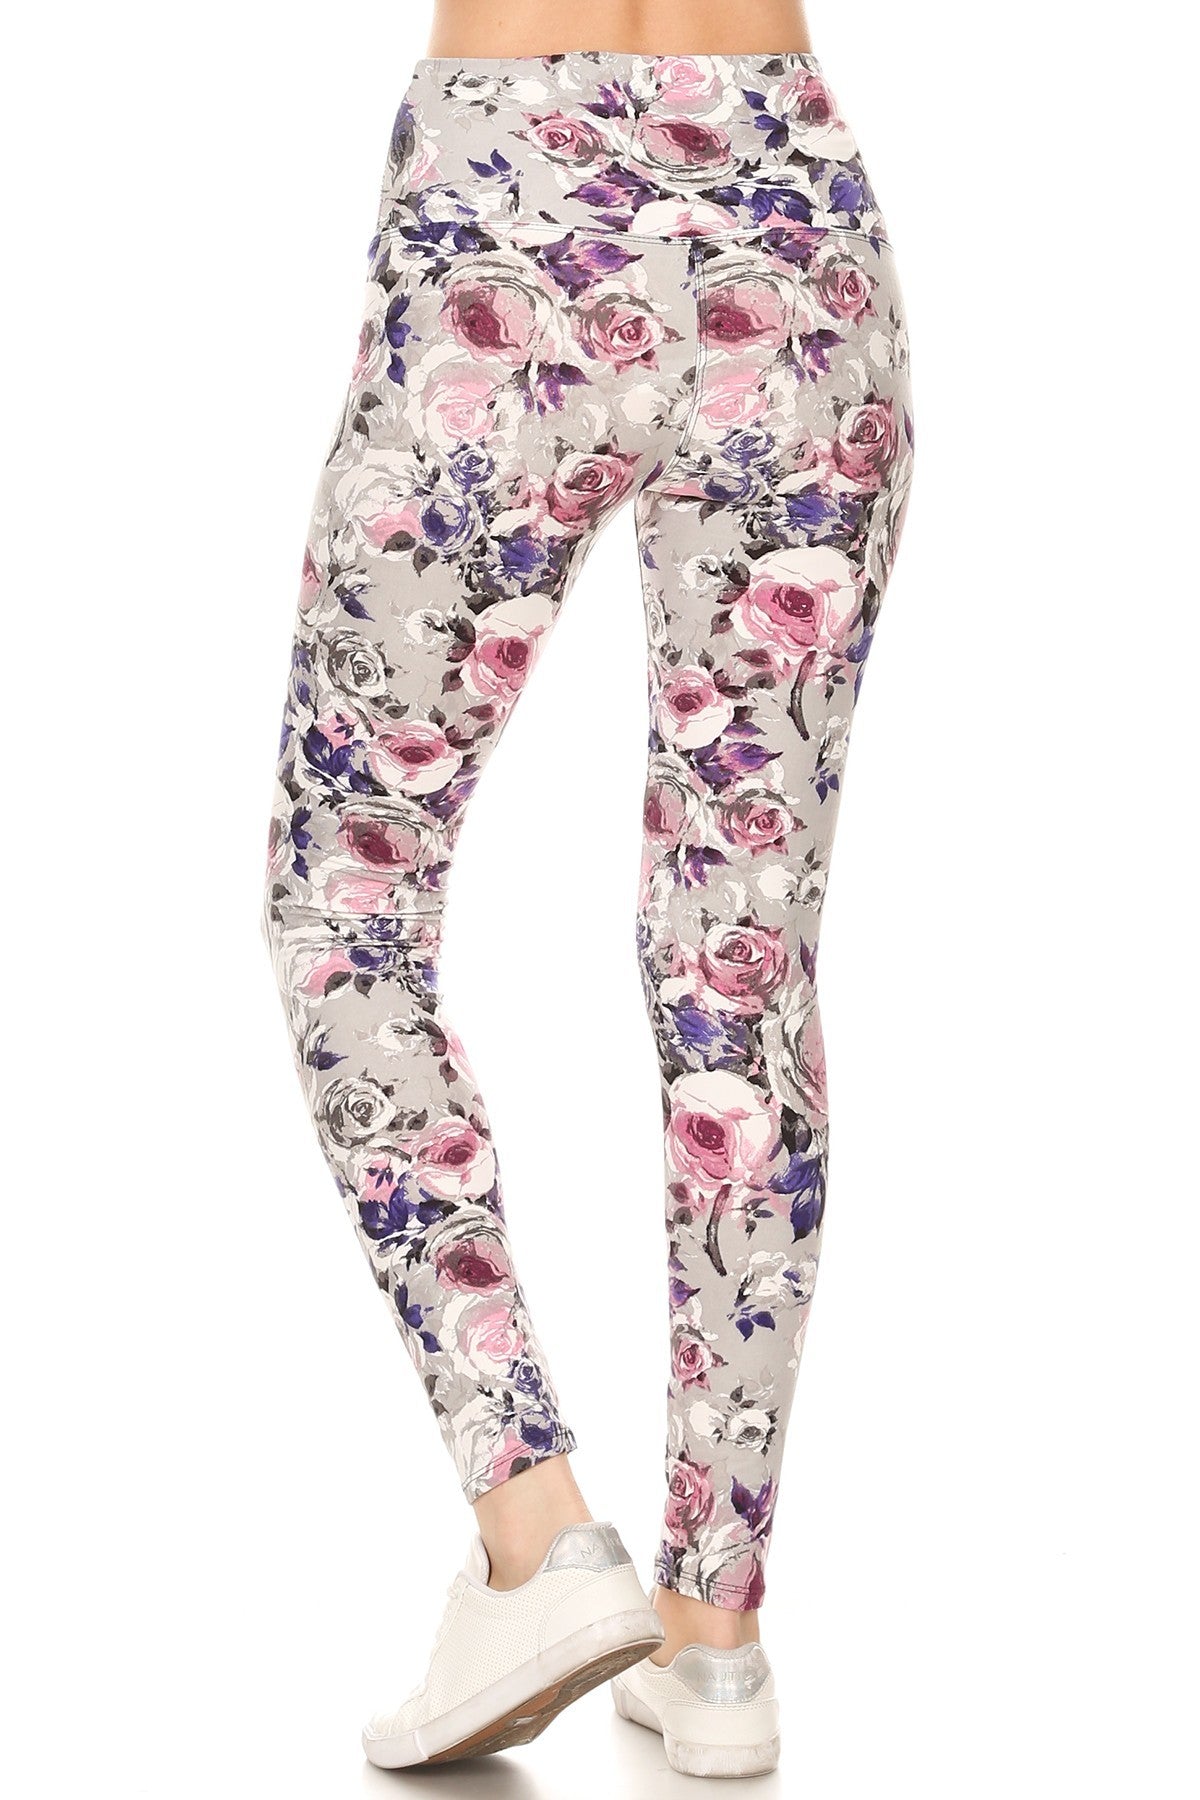 5-inch Long Yoga Style Banded Lined Floral Printed Knit Legging With High Waist-56735.Multi--Love It Clothing